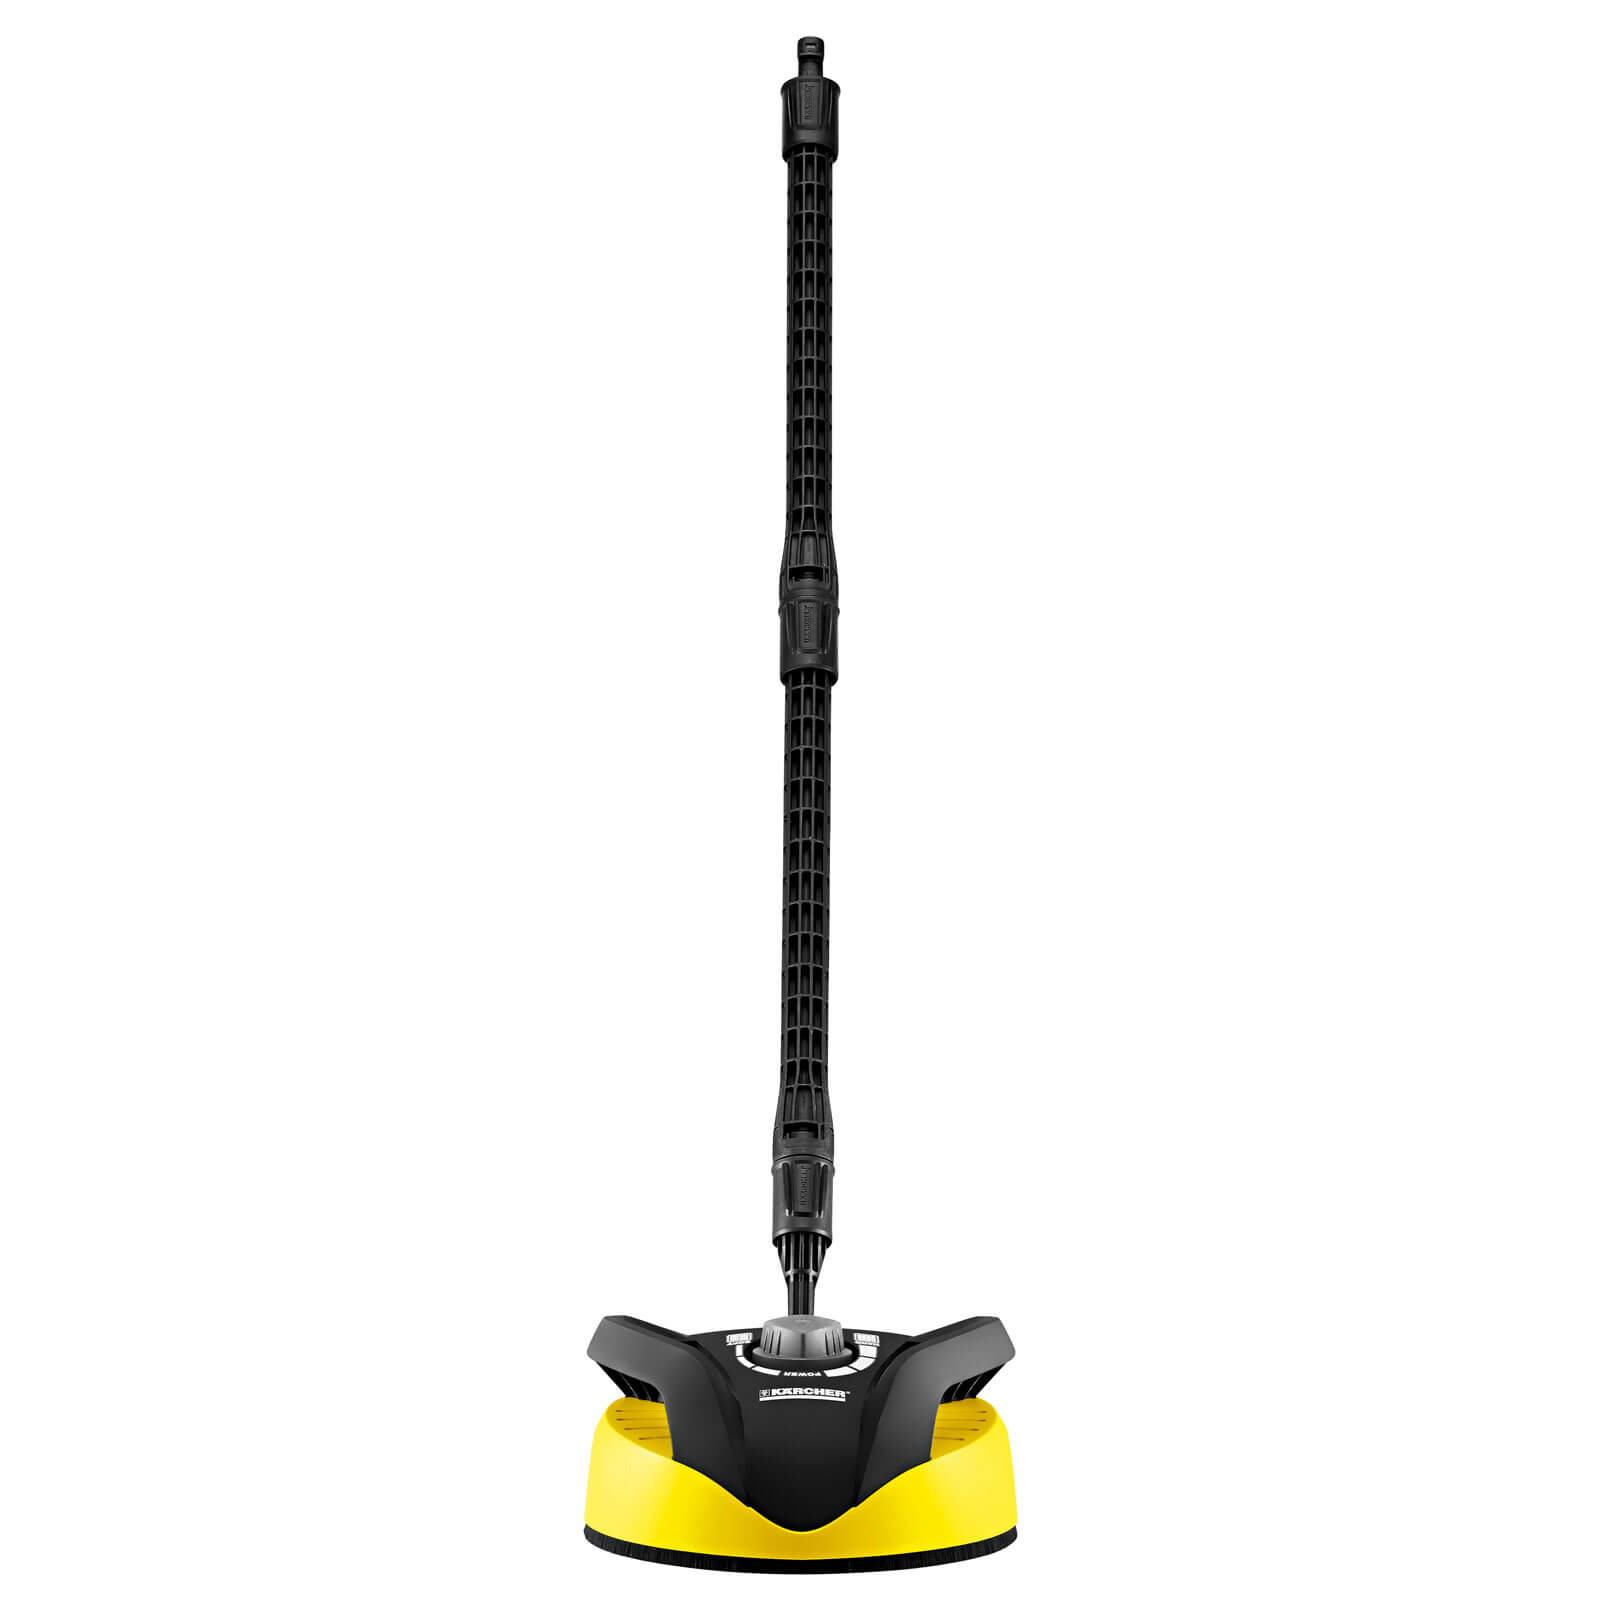 Karcher T350 Patio Cleaner Attachment for K2 - K7 Pressure Washers